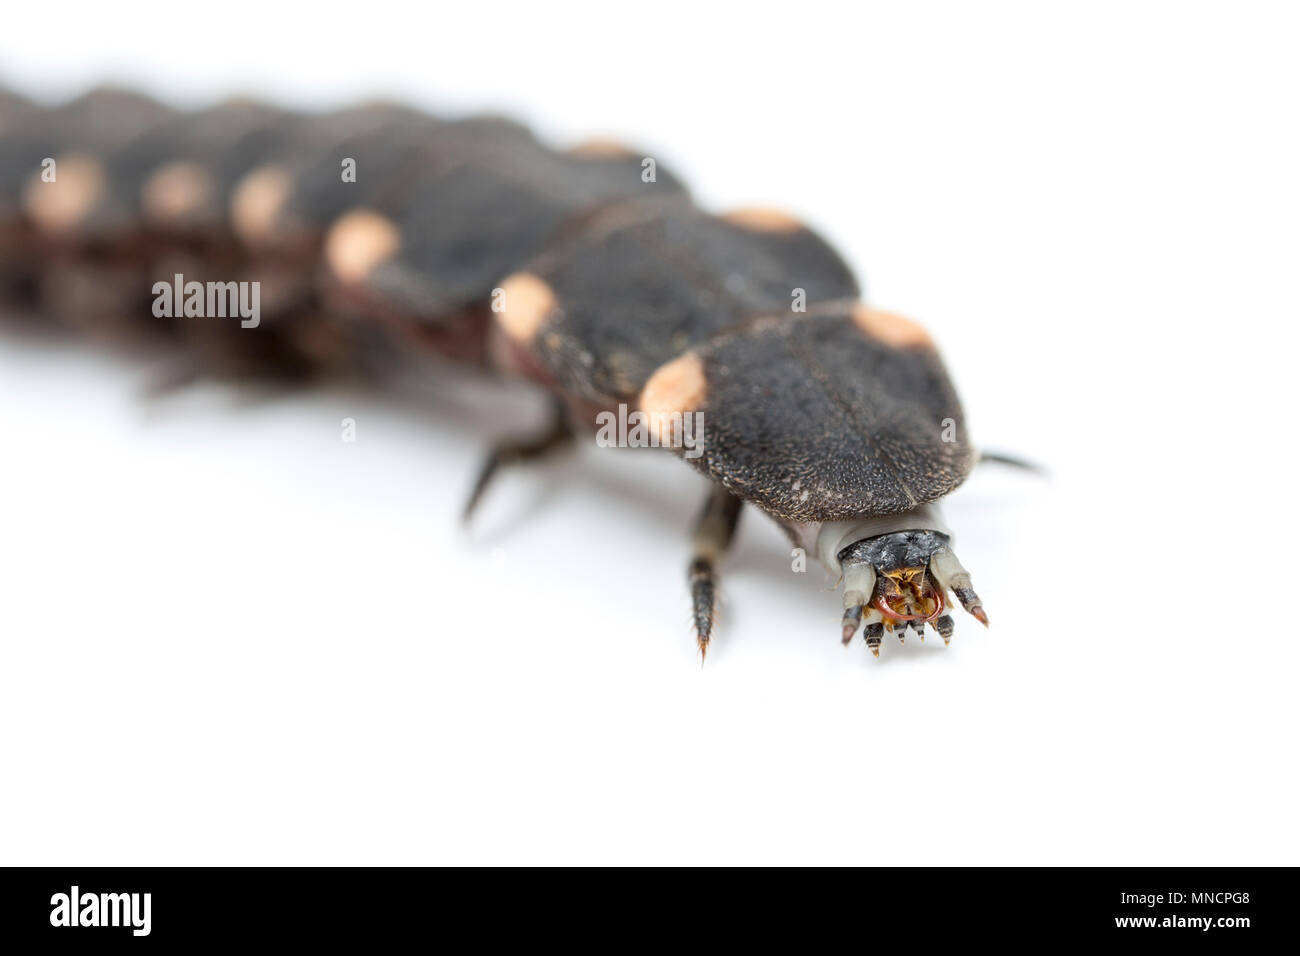 A female glow worm, Lampyris noctiluca, photographed in a studio. The glow worms feed on slugs and snails and produce light to attract males with a li Stock Photo